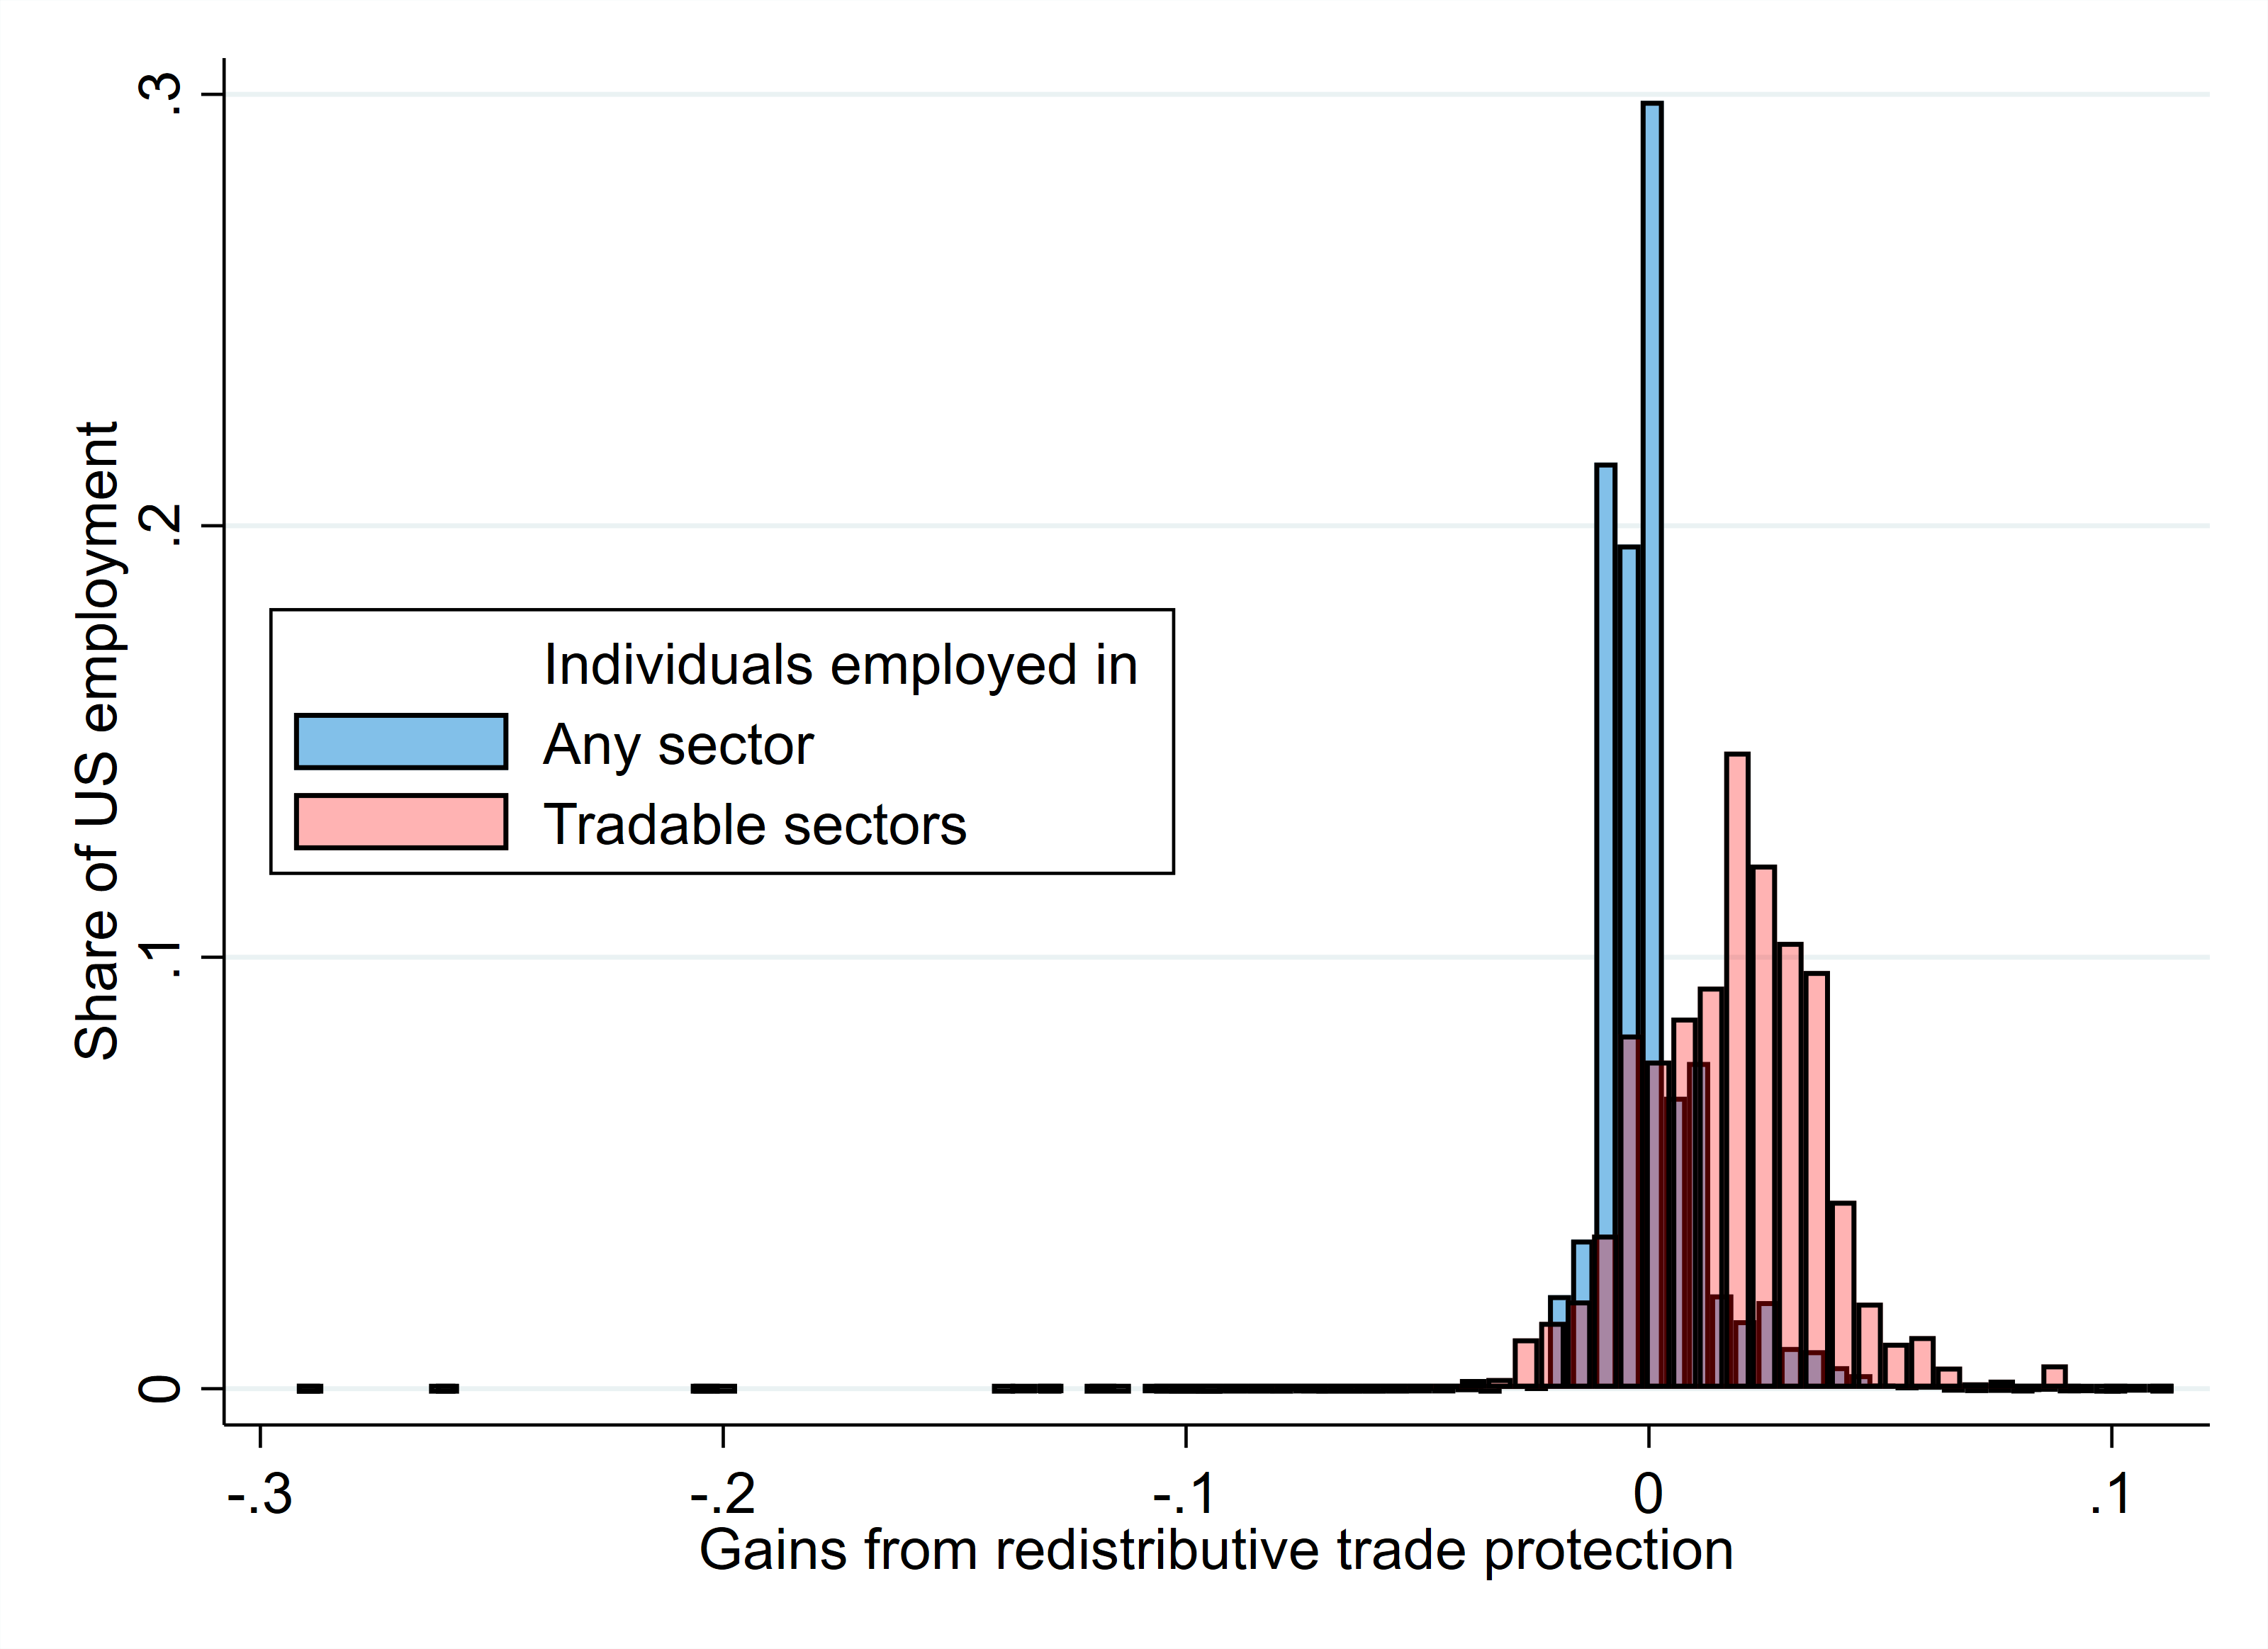 Figure 4 Gains from redistributive trade protection